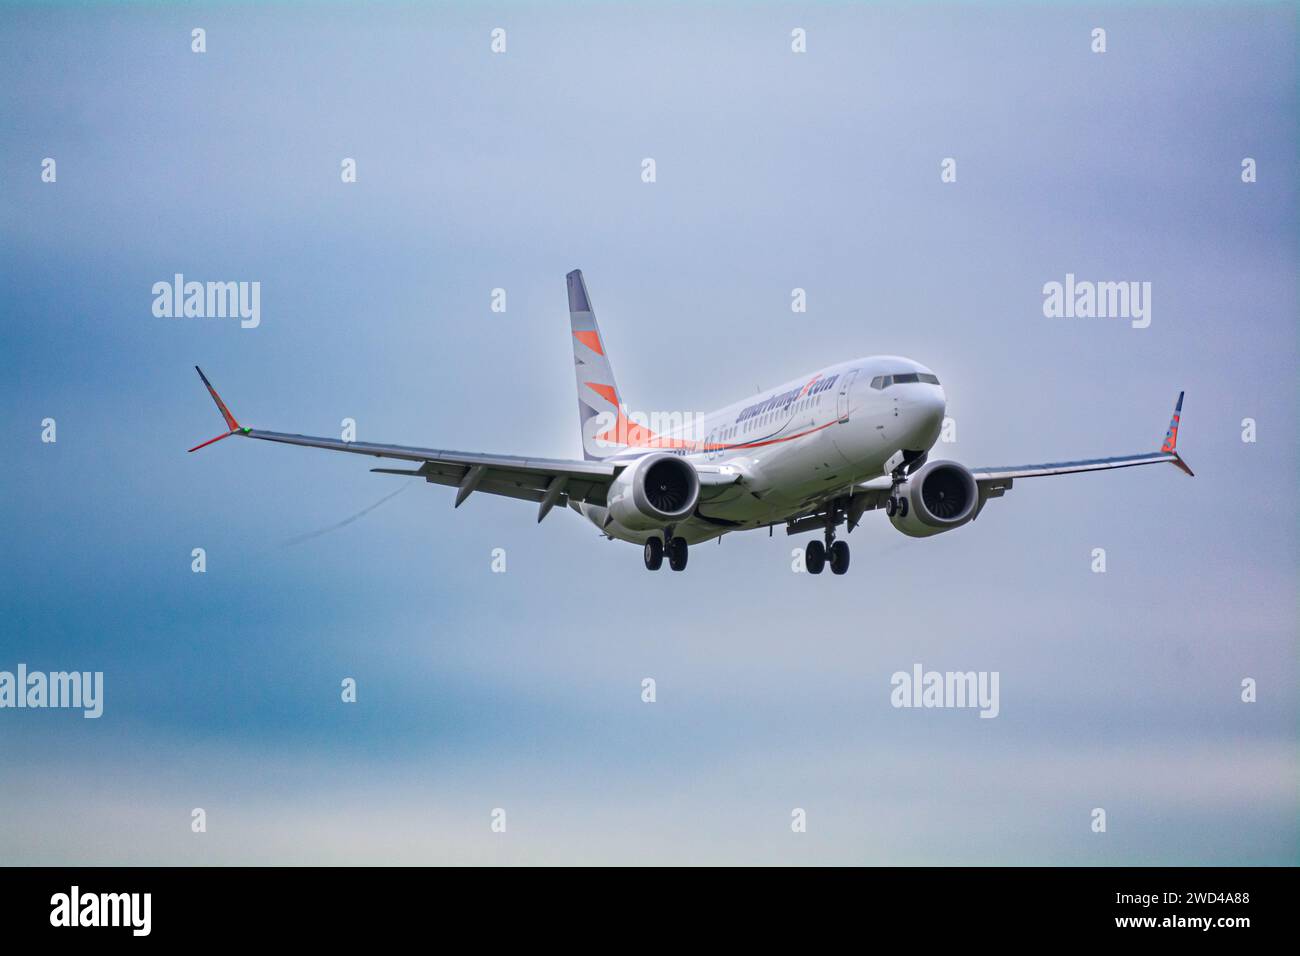 Boeing 737 Max 8 Commercial airline (OK -SWA) operated by smart wings, landing in strong winds and turbulence in Europe. Stock Photo